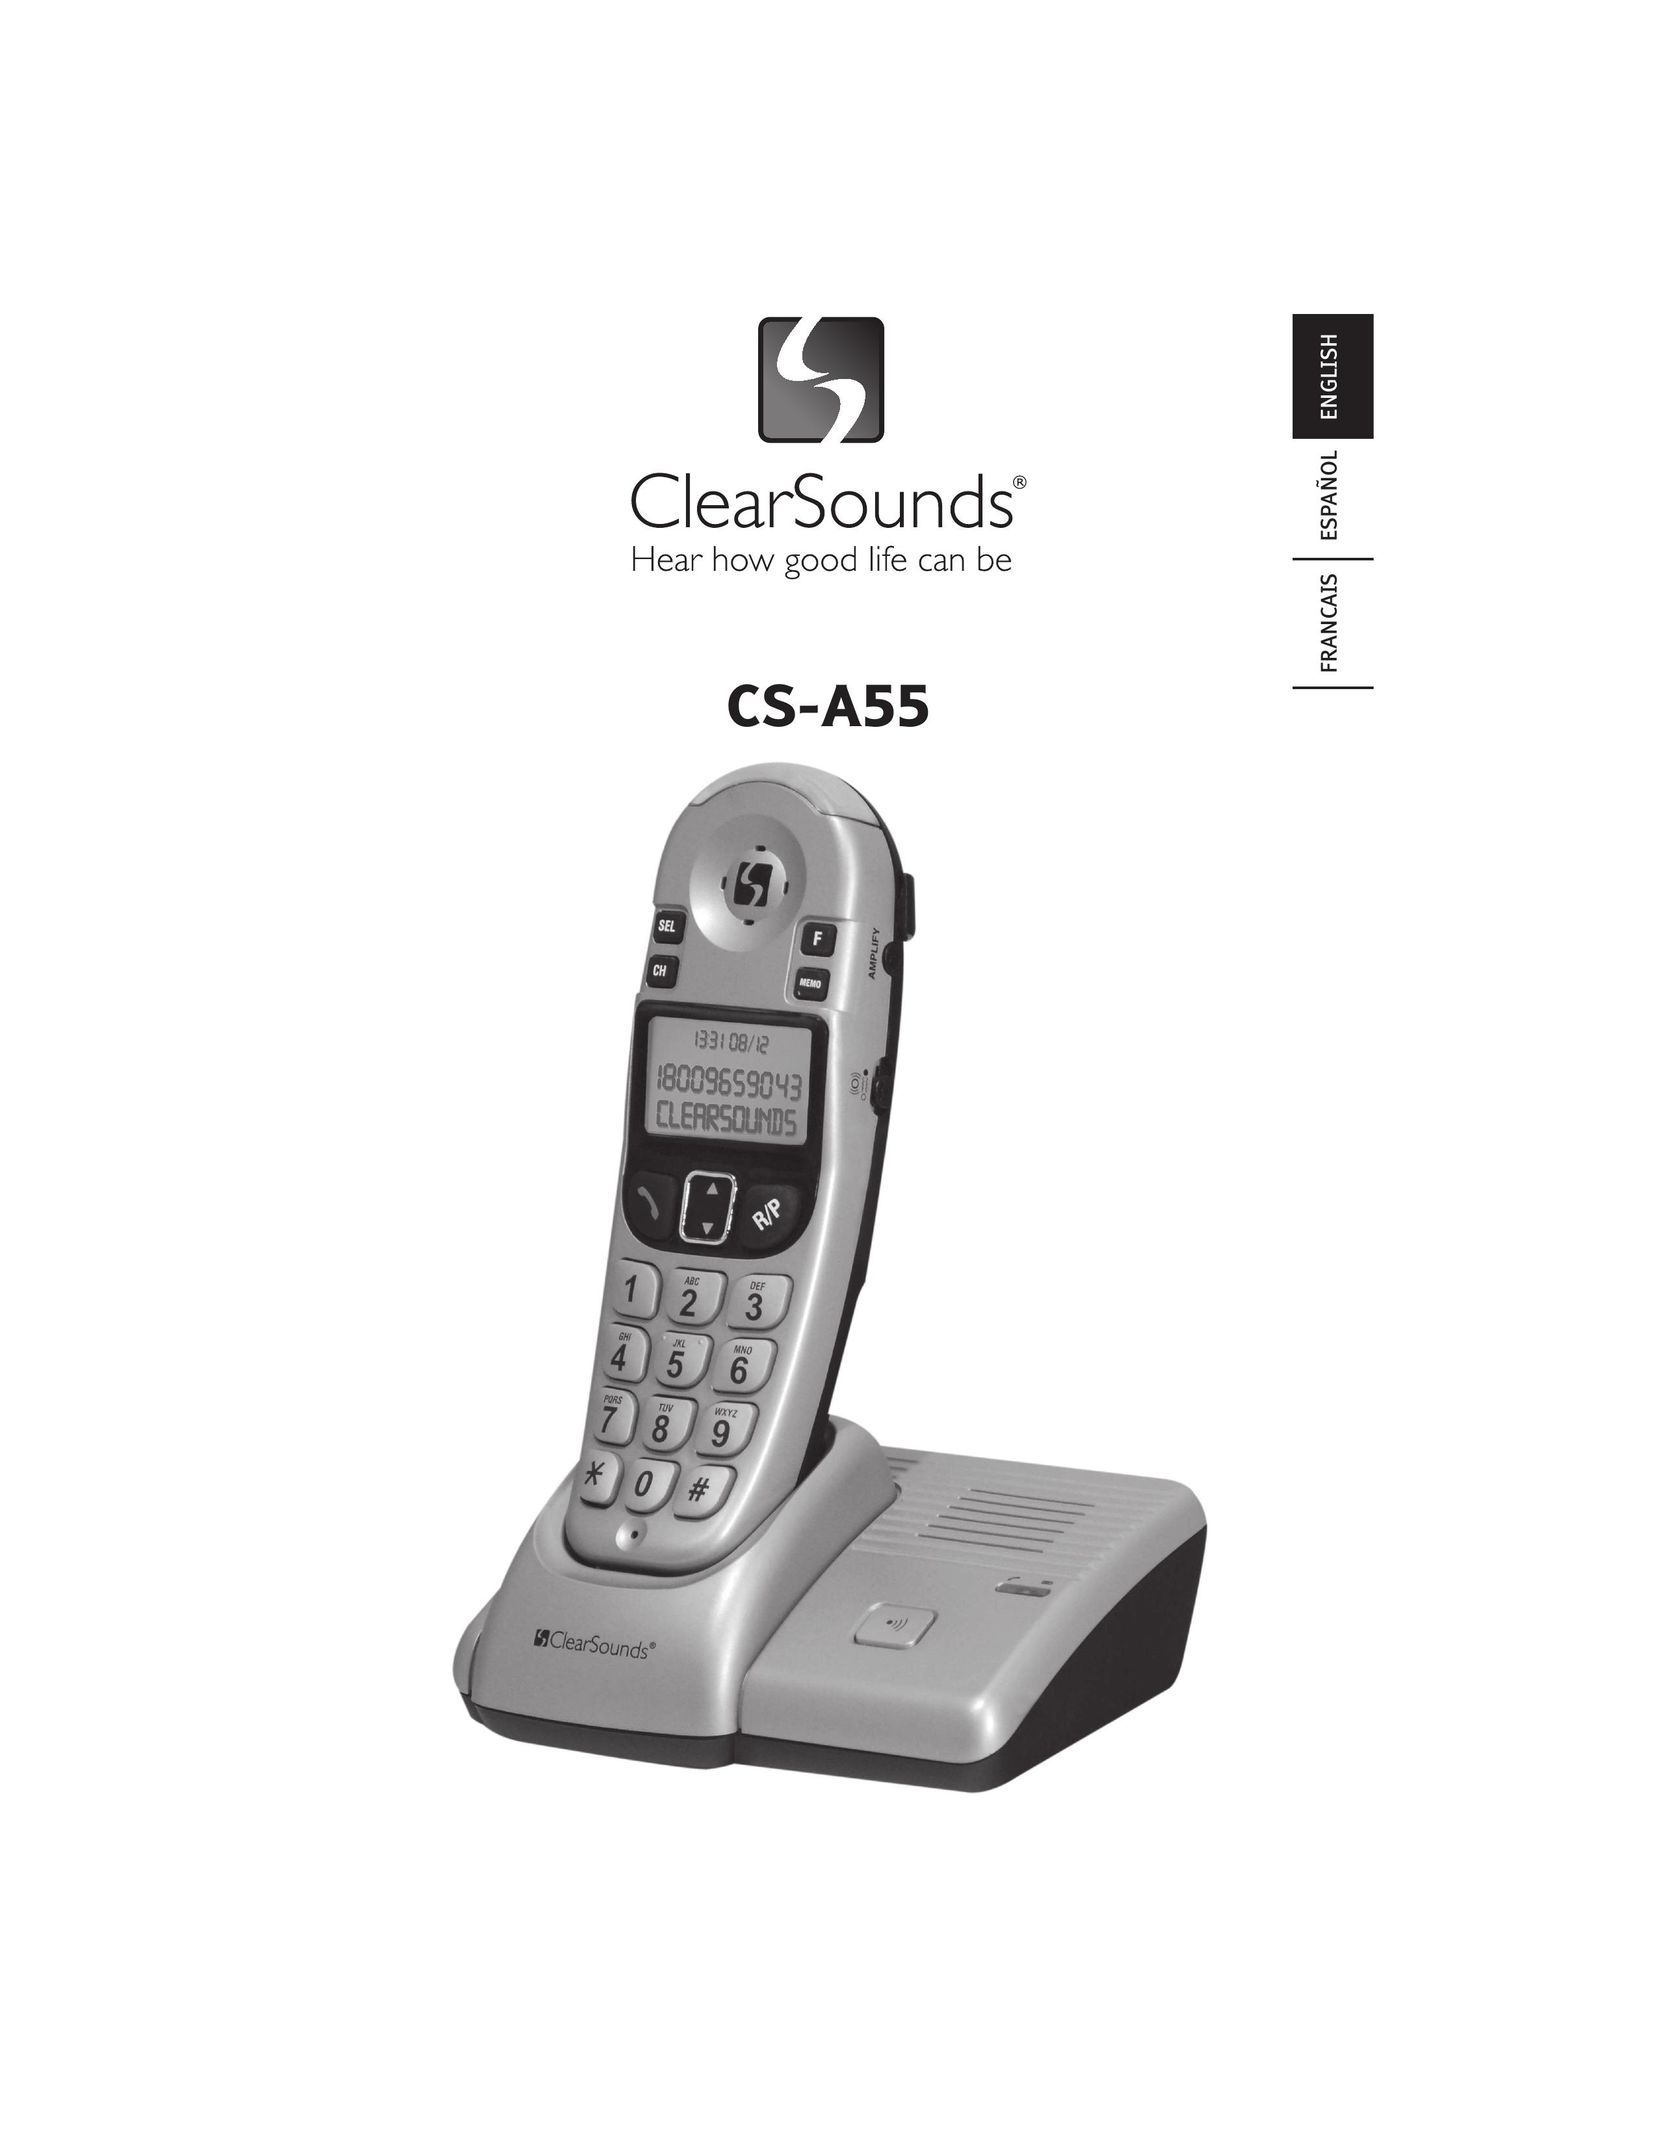 ClearSounds CS-A55 Cordless Telephone User Manual